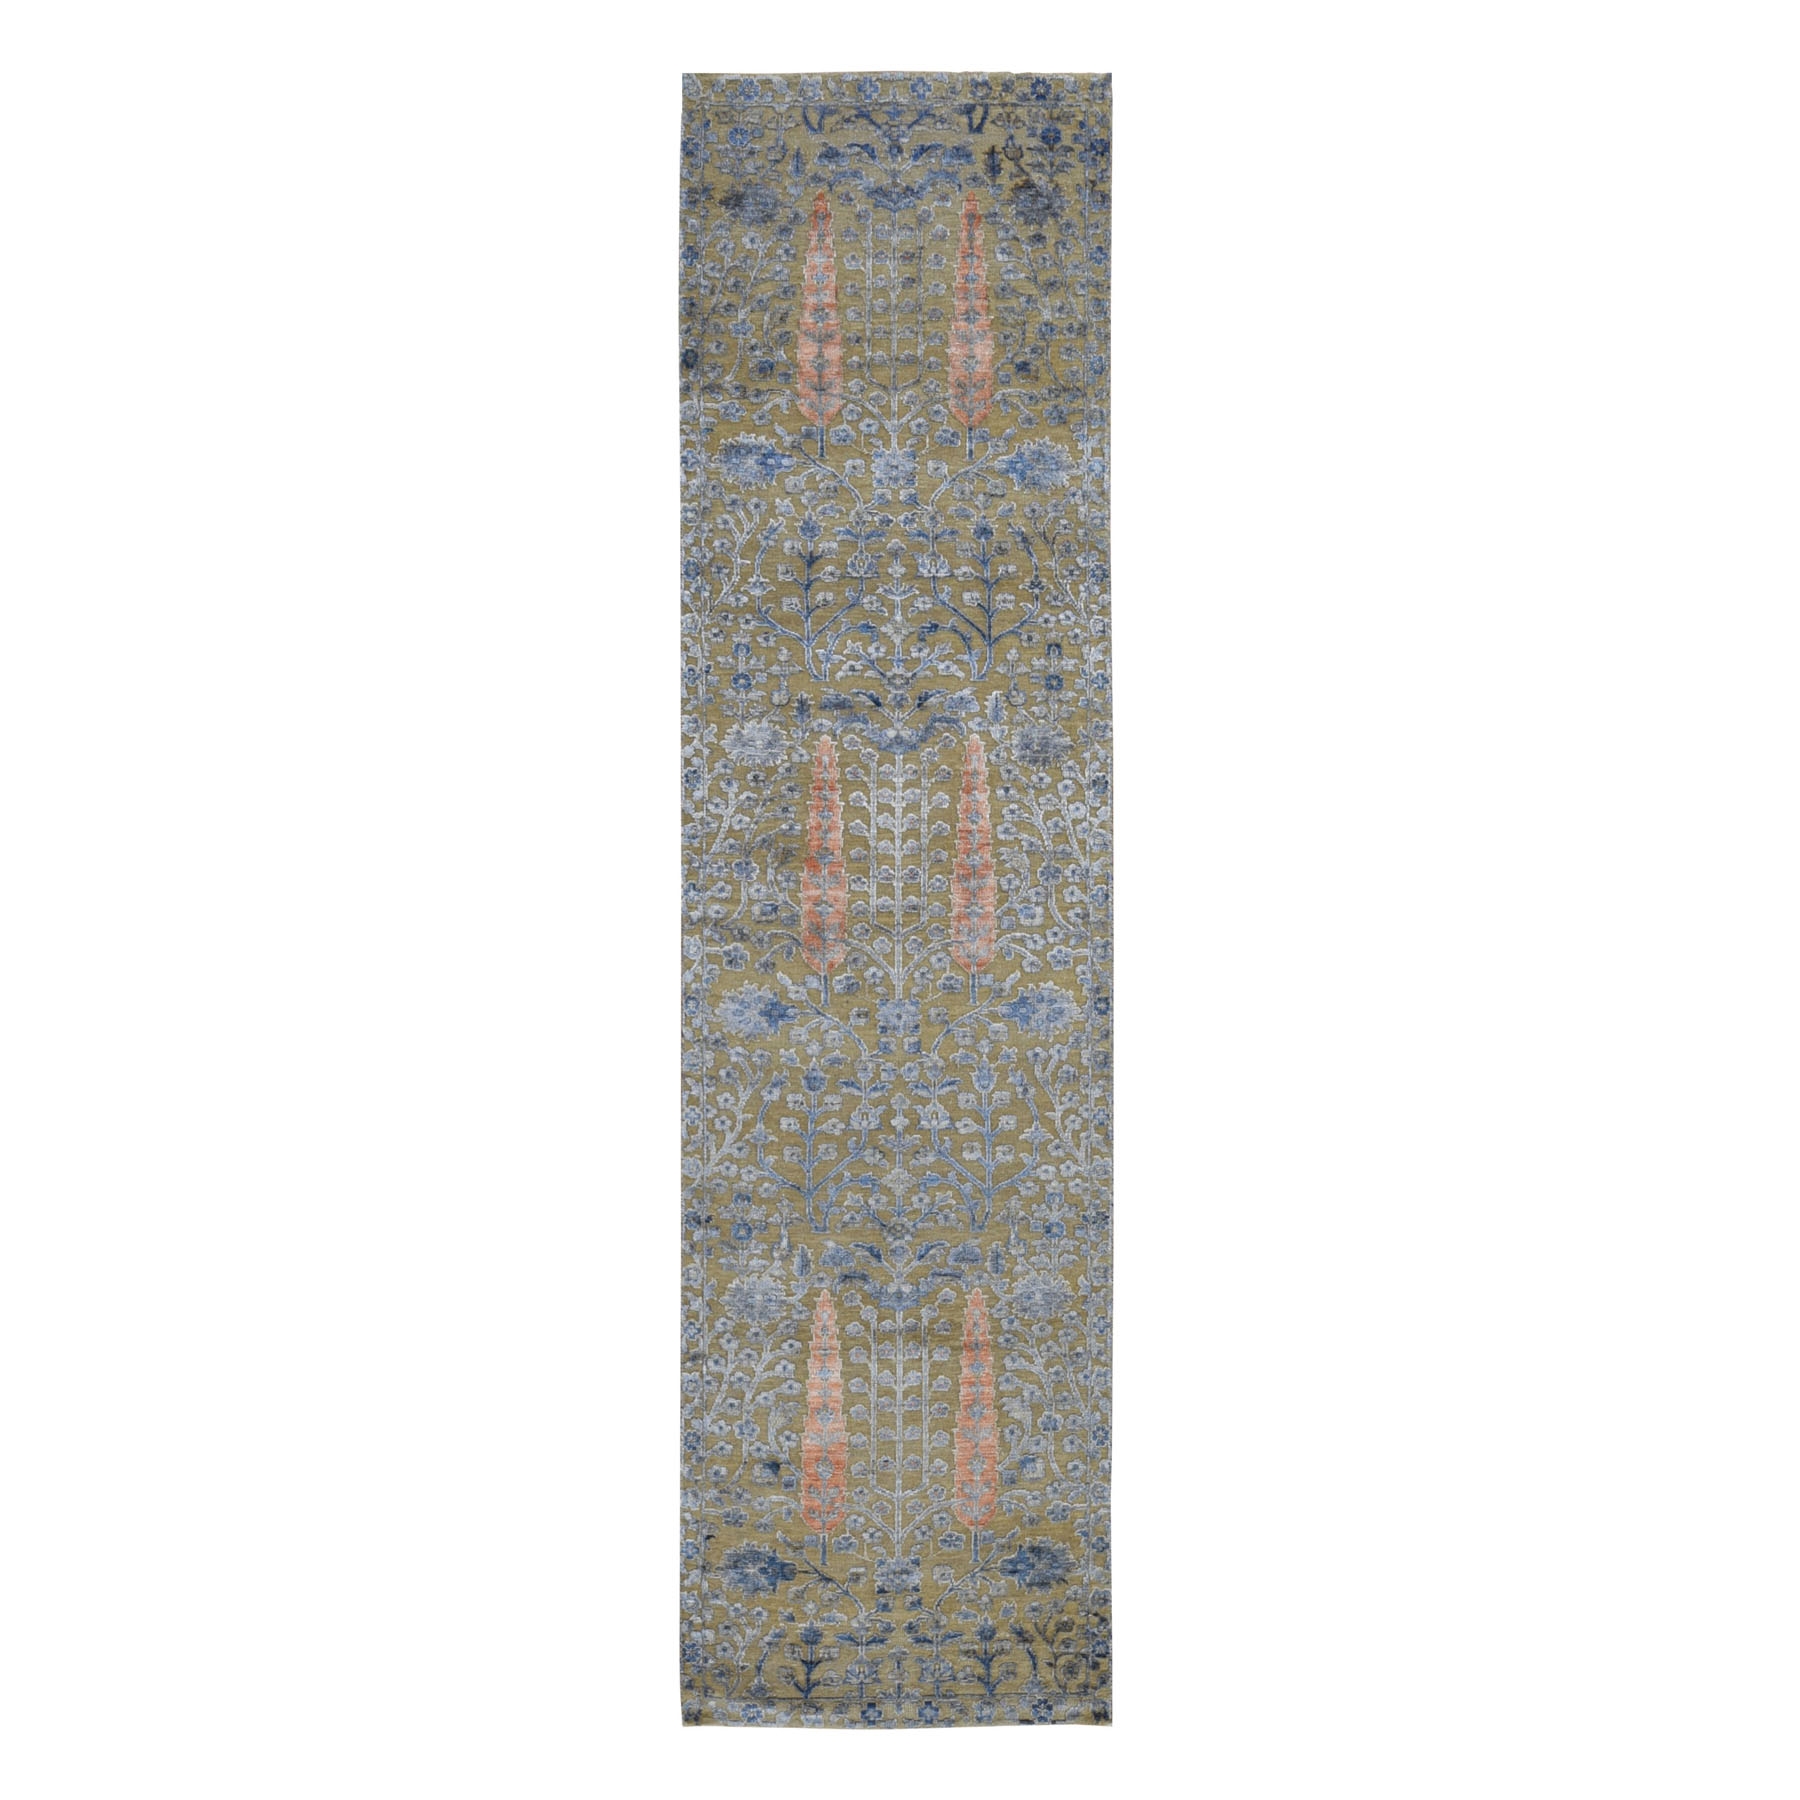 2'6"X9'10" Cypress Tree Design Silk With Textured Wool Runner Hand Knotted Oriental Rug moad9d7b